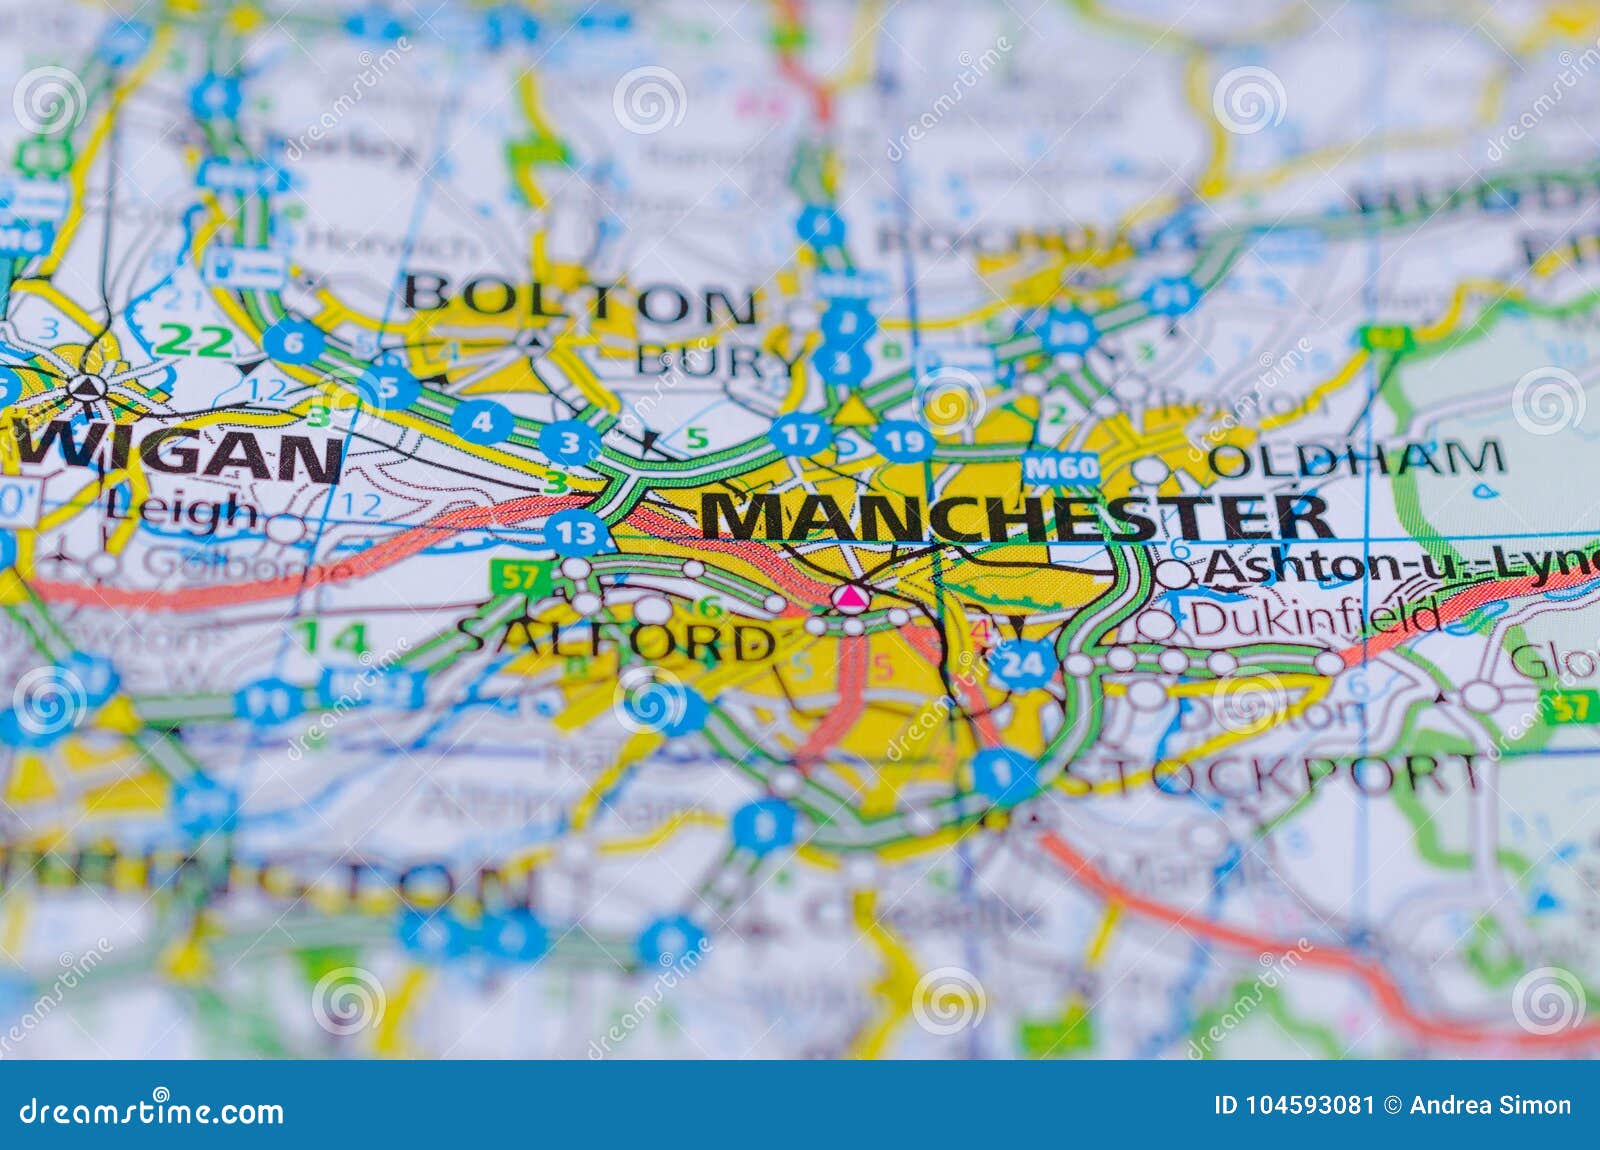 manchester on map